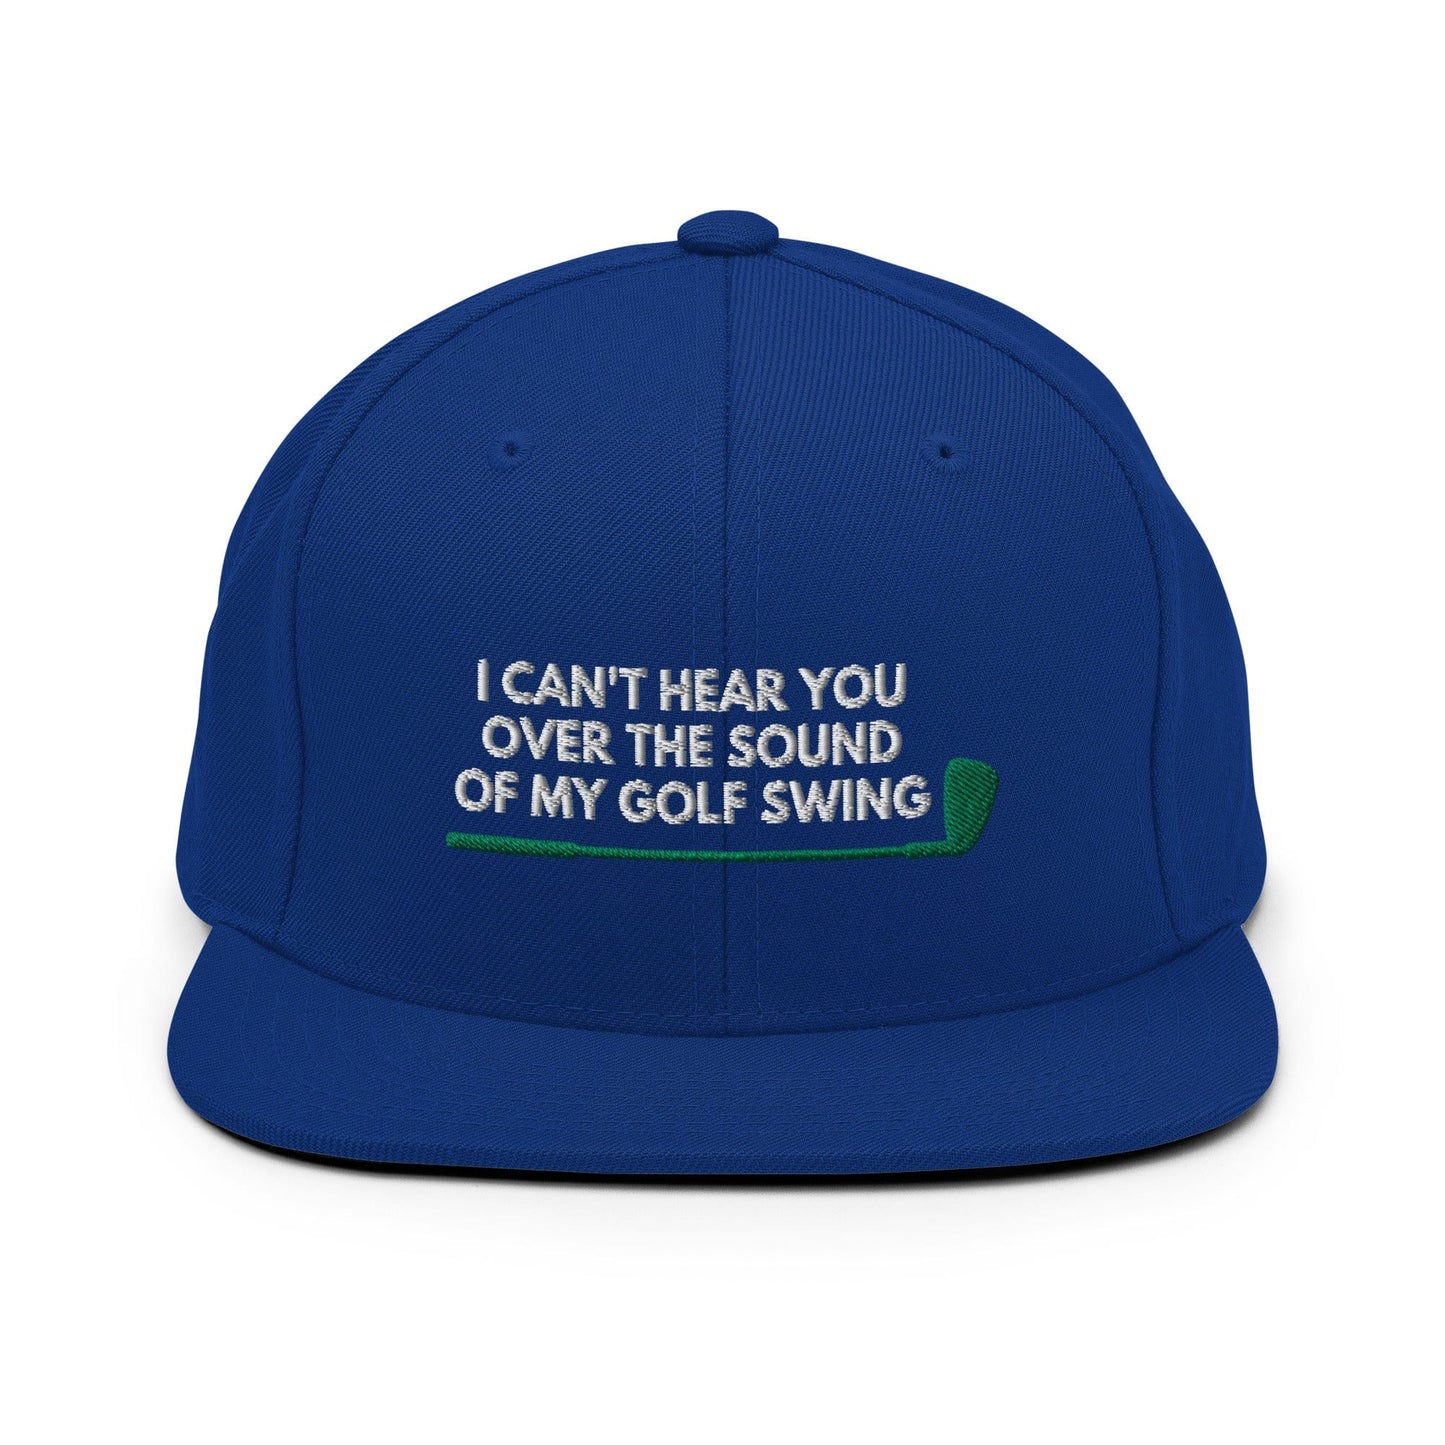 Funny Golfer Gifts  Snapback Hat Royal Blue I Cant Hear You Over The Sound Of My Golf Swing Hat Snapback Hat